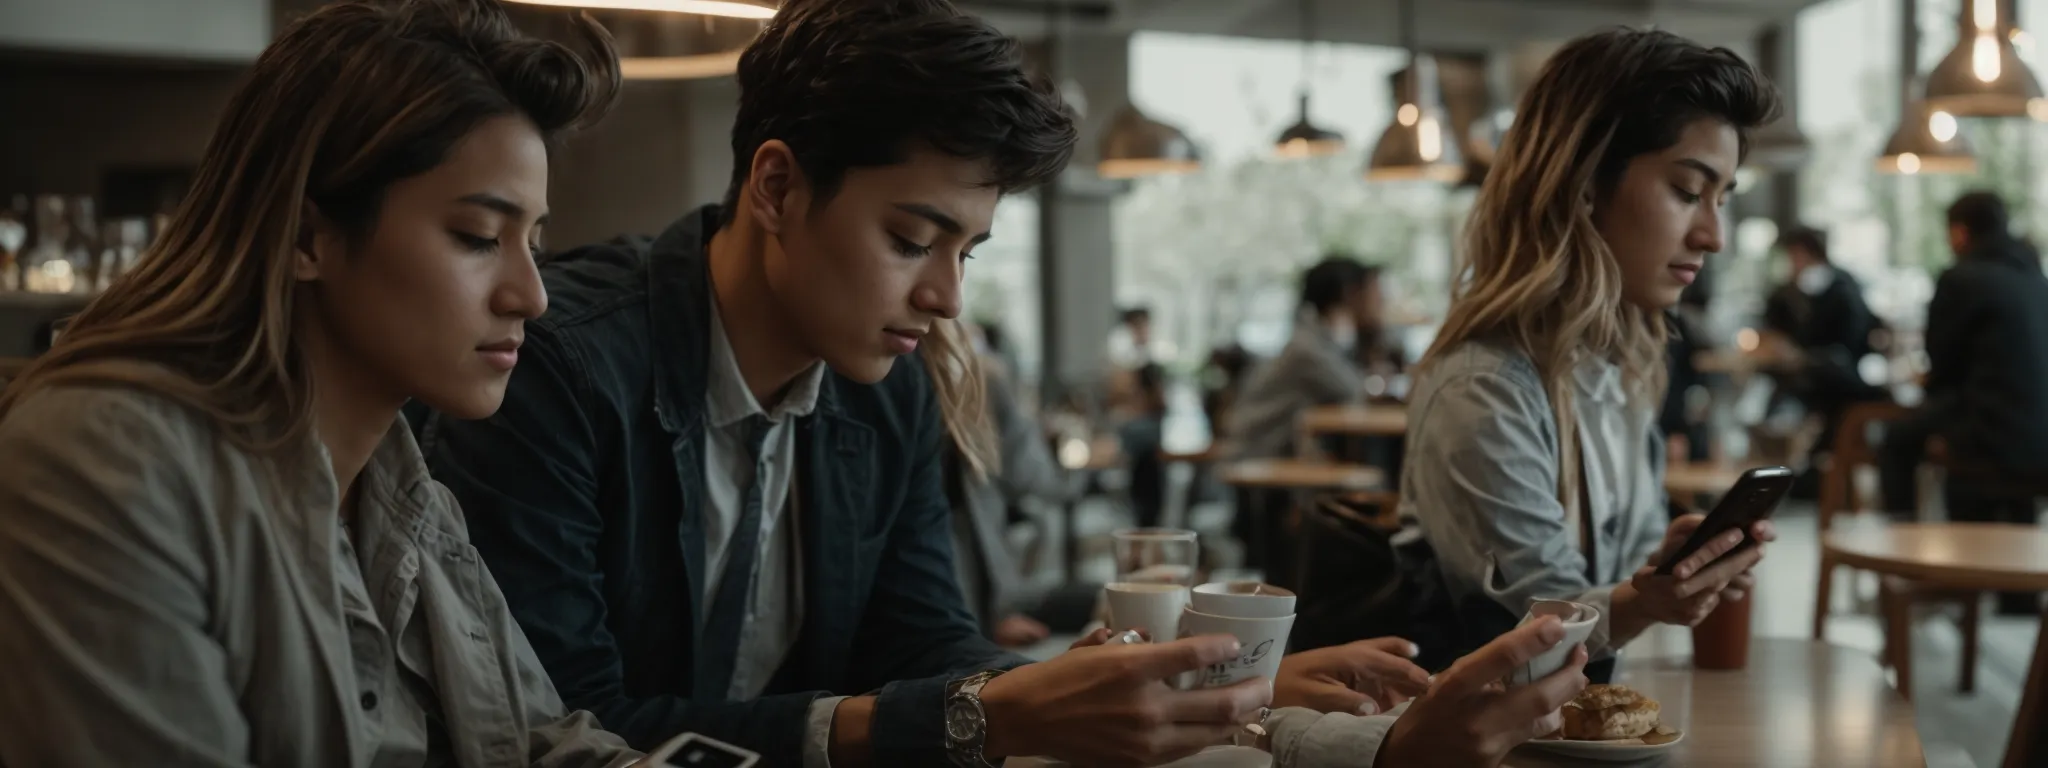 two individuals chat comfortably on their smartphones in a well-lit modern cafe, symbolizing an effortless digital conversation experience.